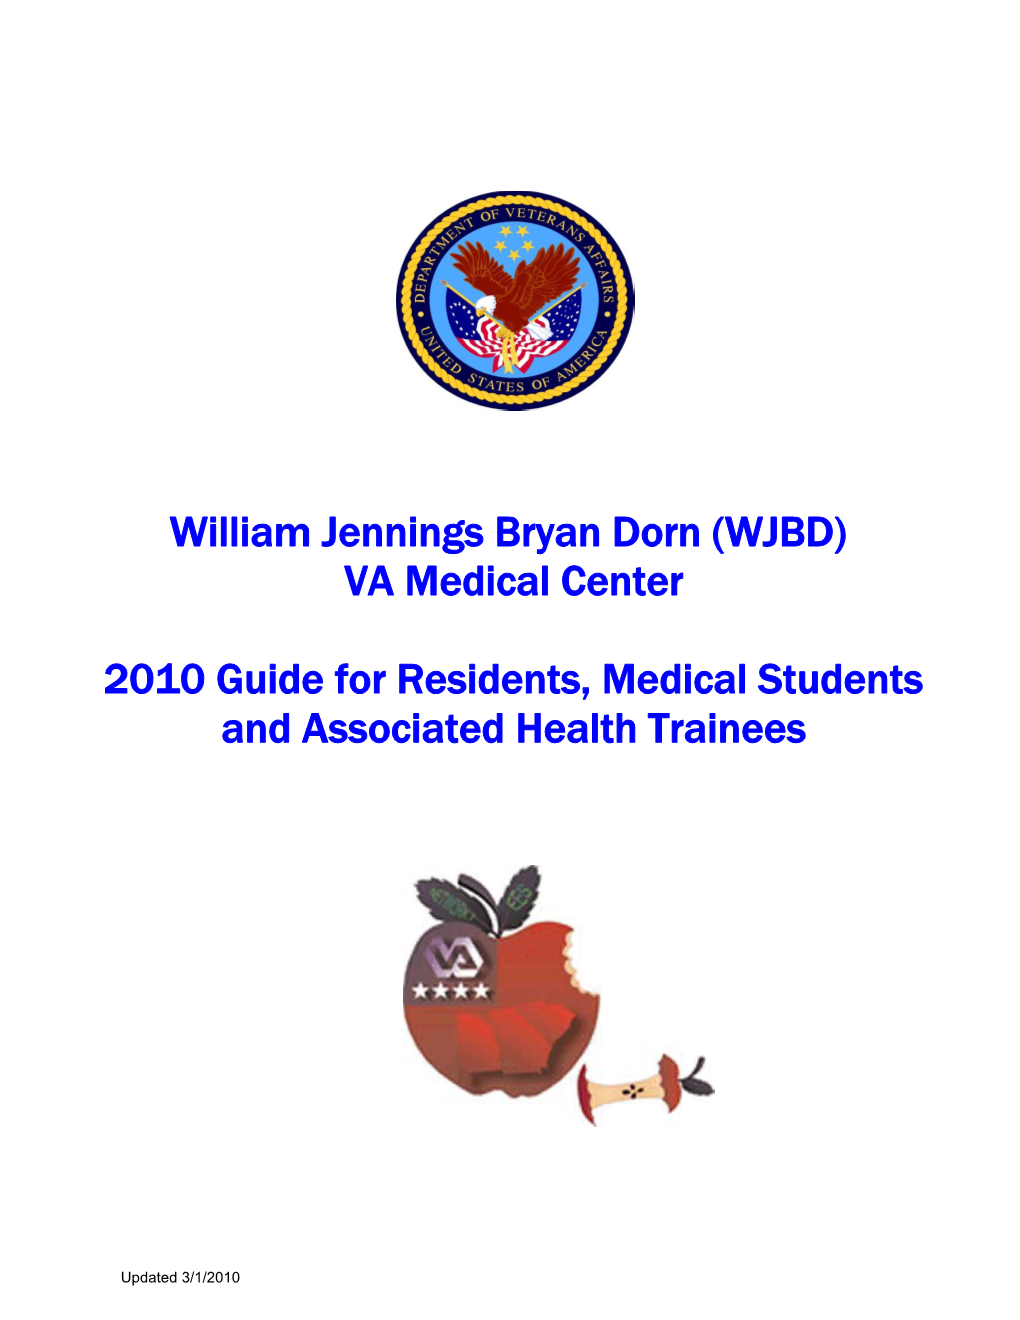 Guide for Residents, Associated Health Trainees and Students